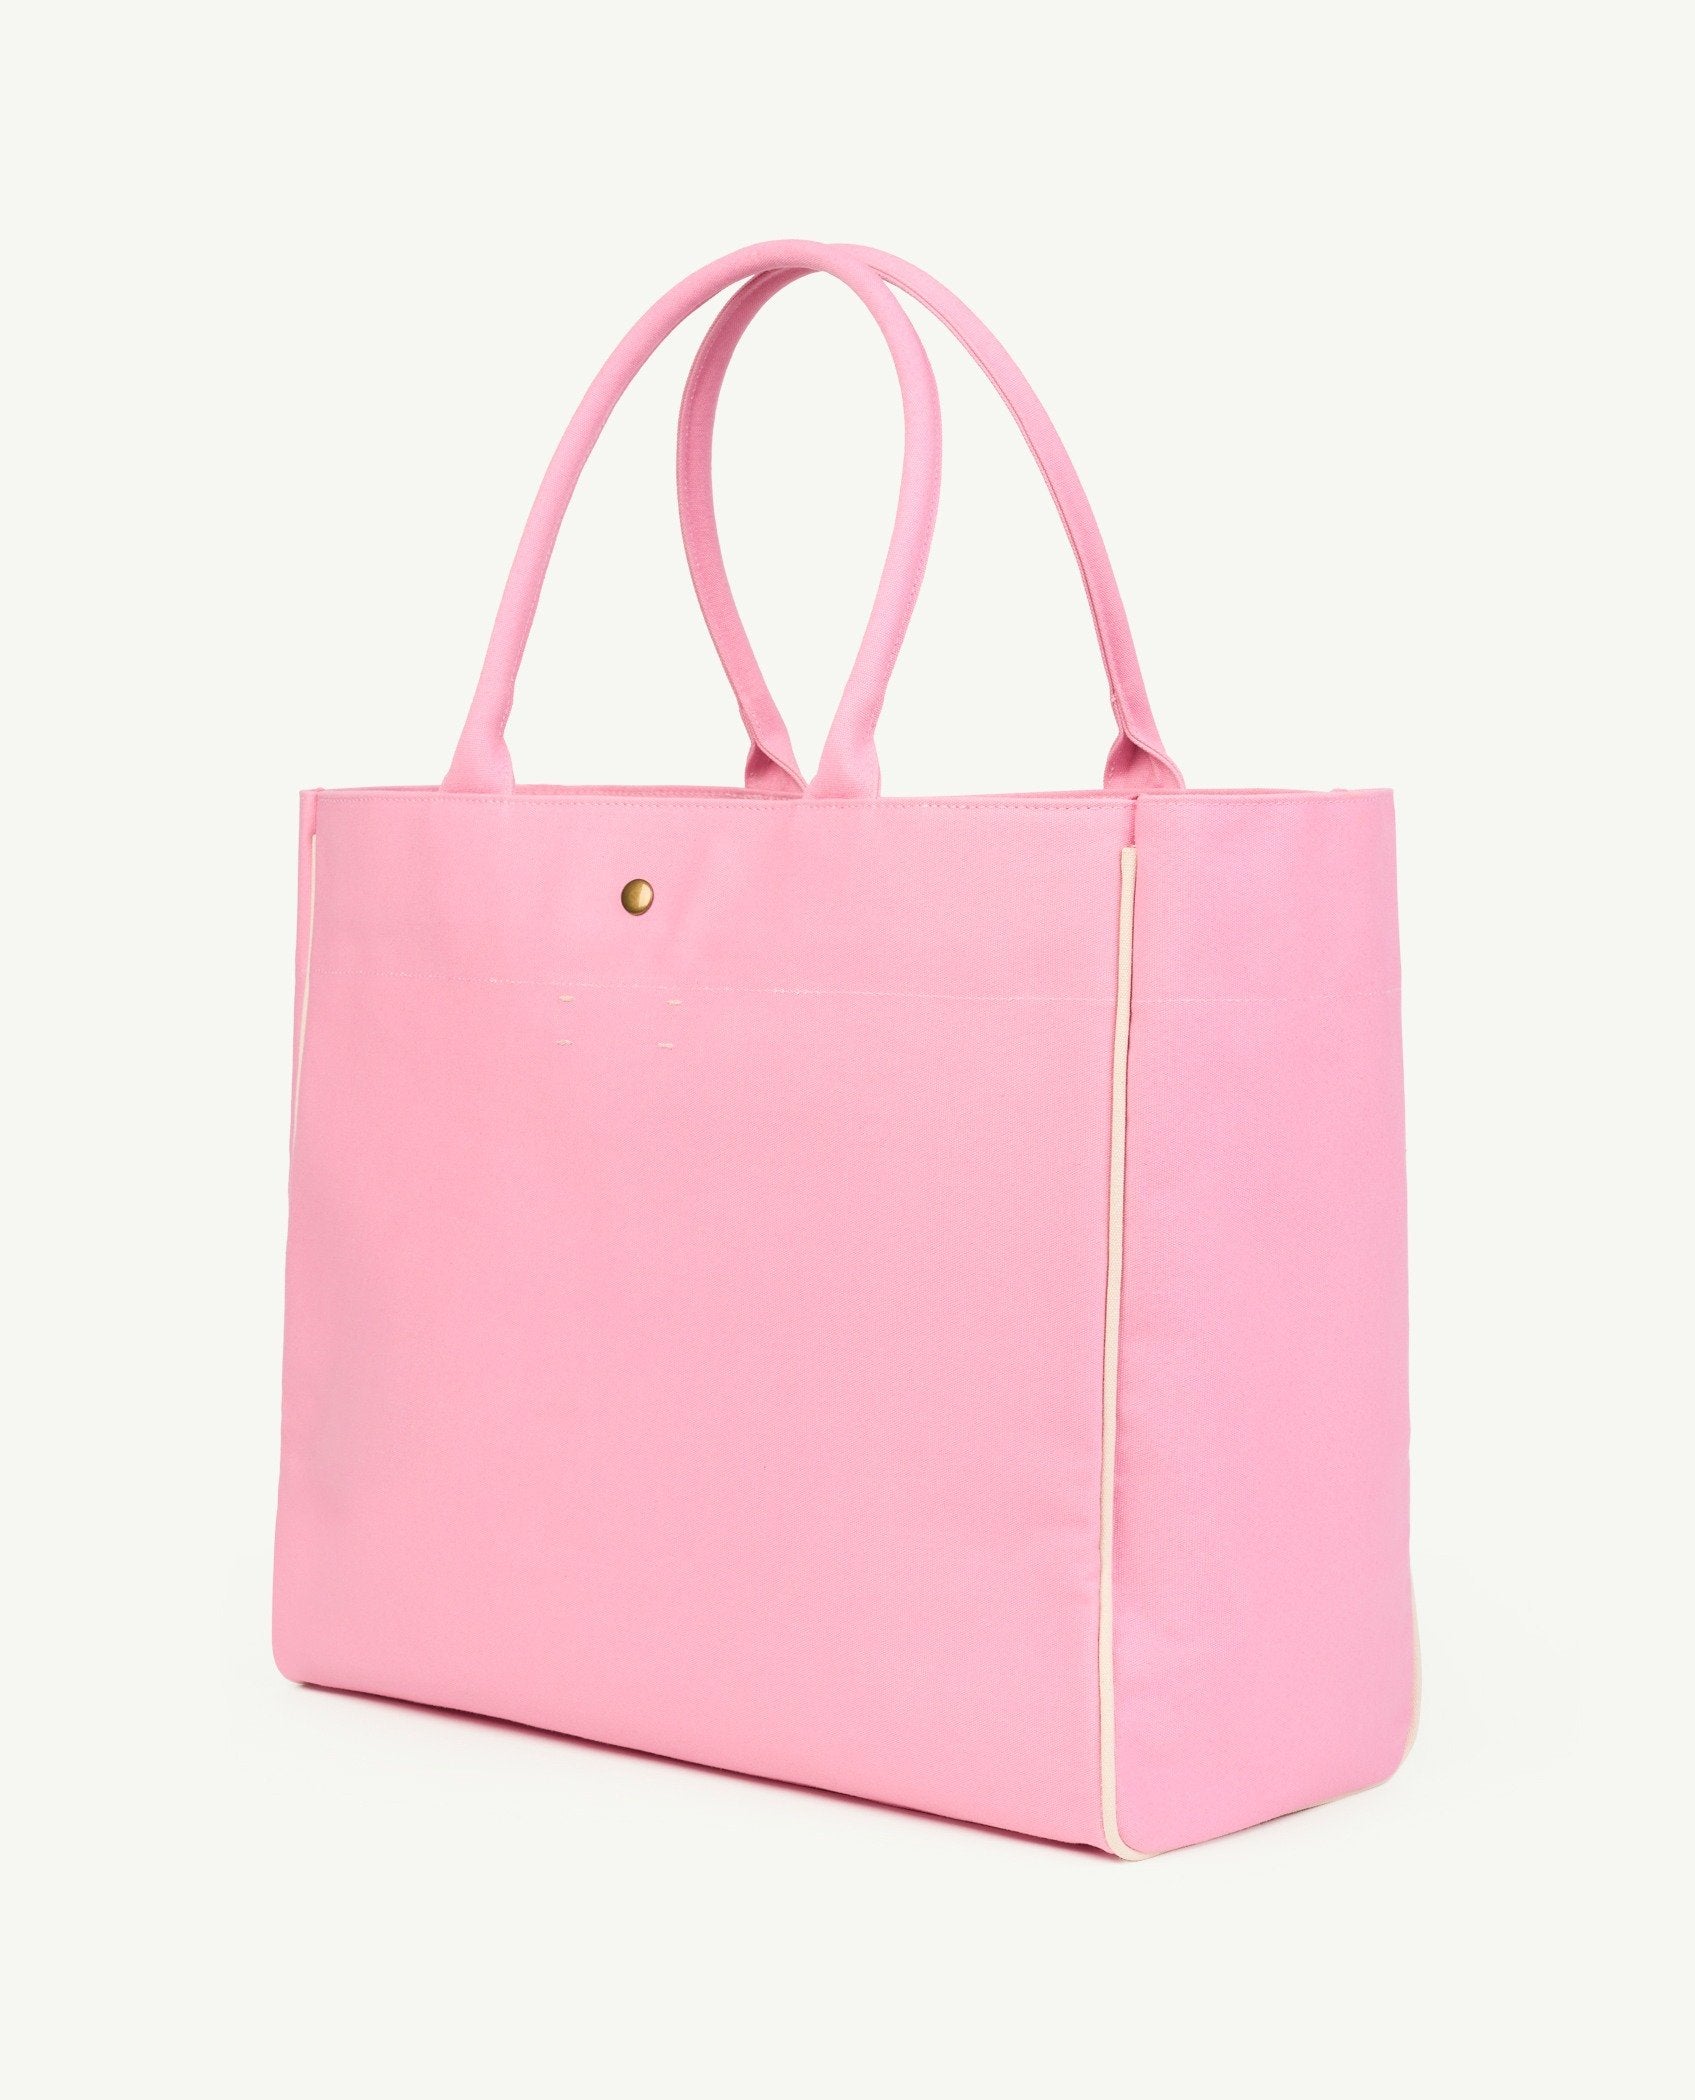 Soft Pink Sun Tote Bag PRODUCT BACK